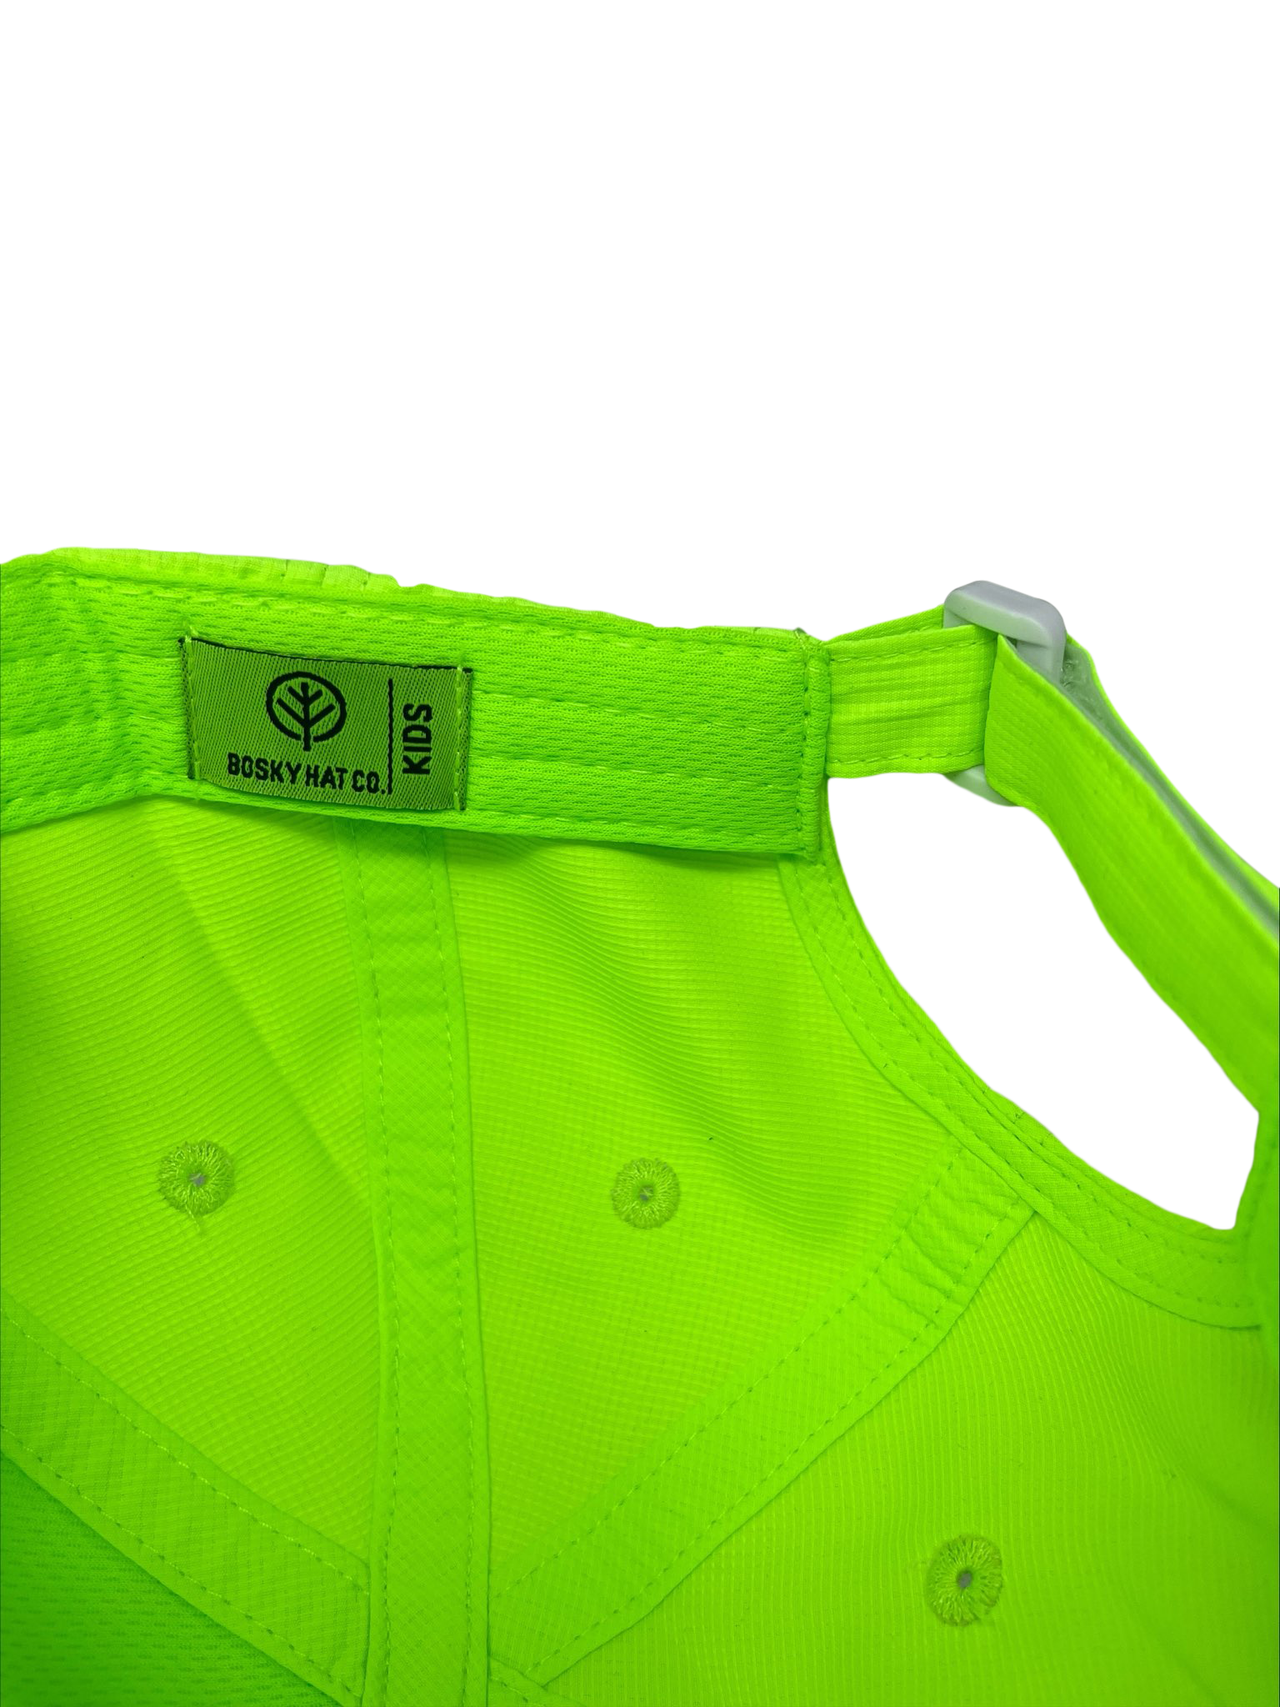 Kids Water Proof Safety Hat Neon Green